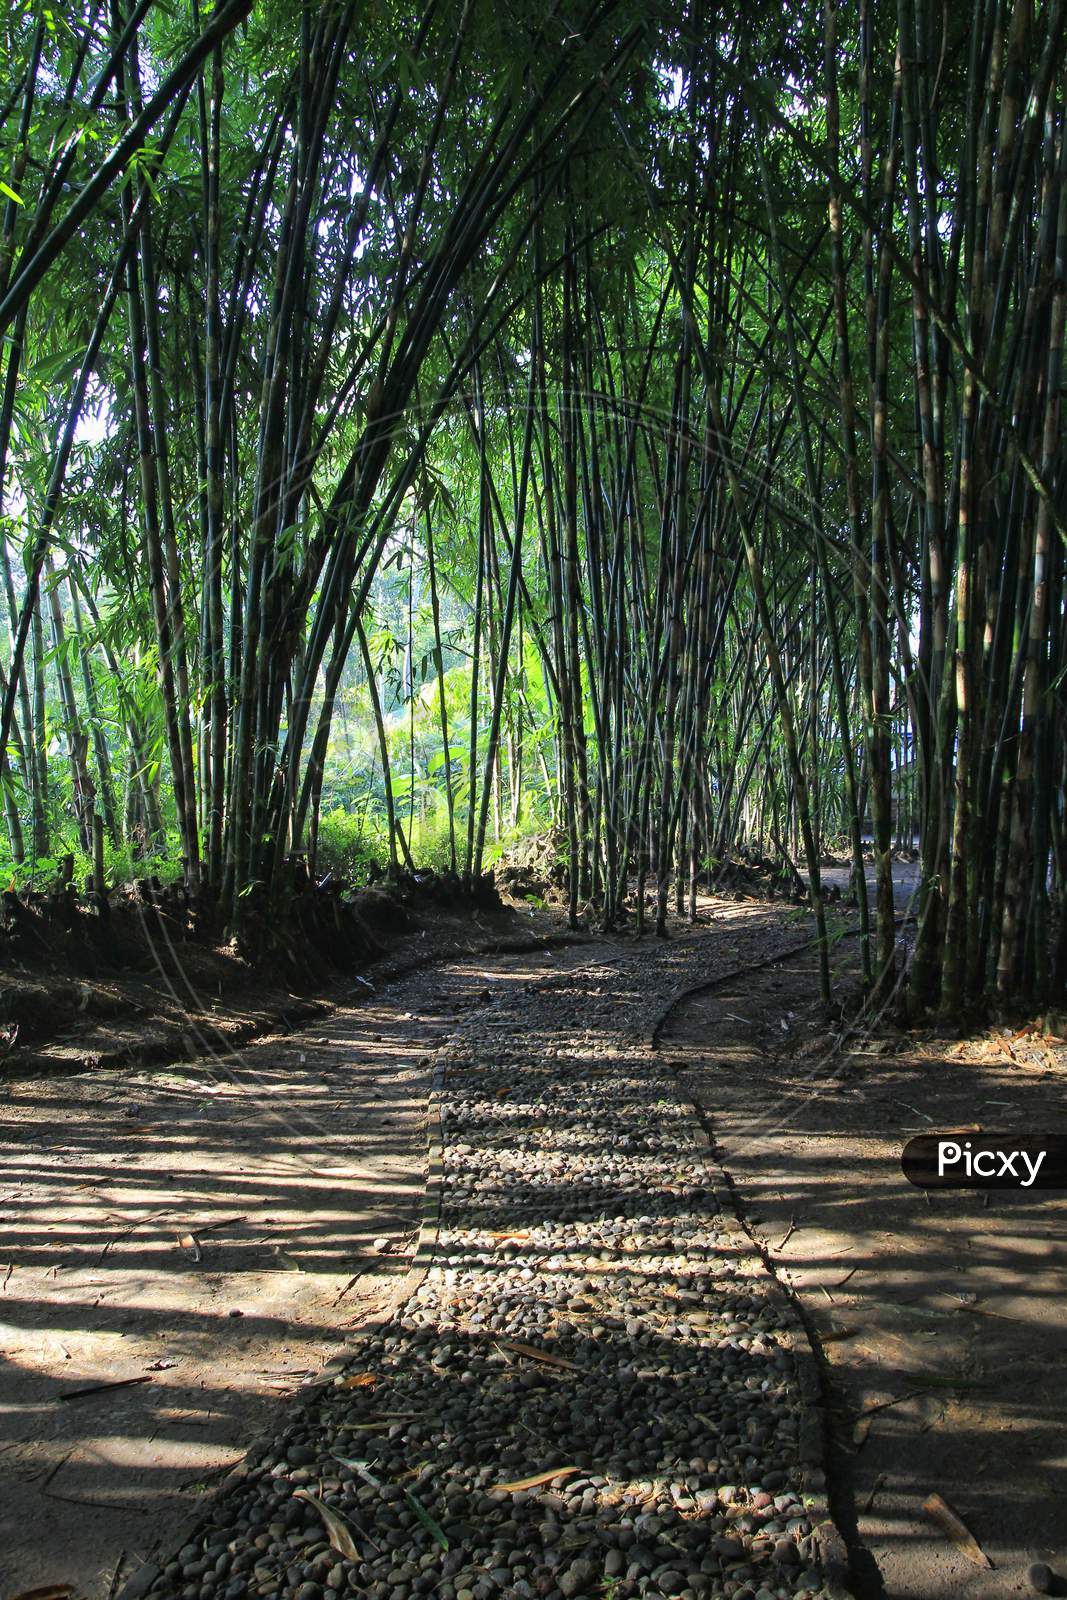 Forest of bamboo trees